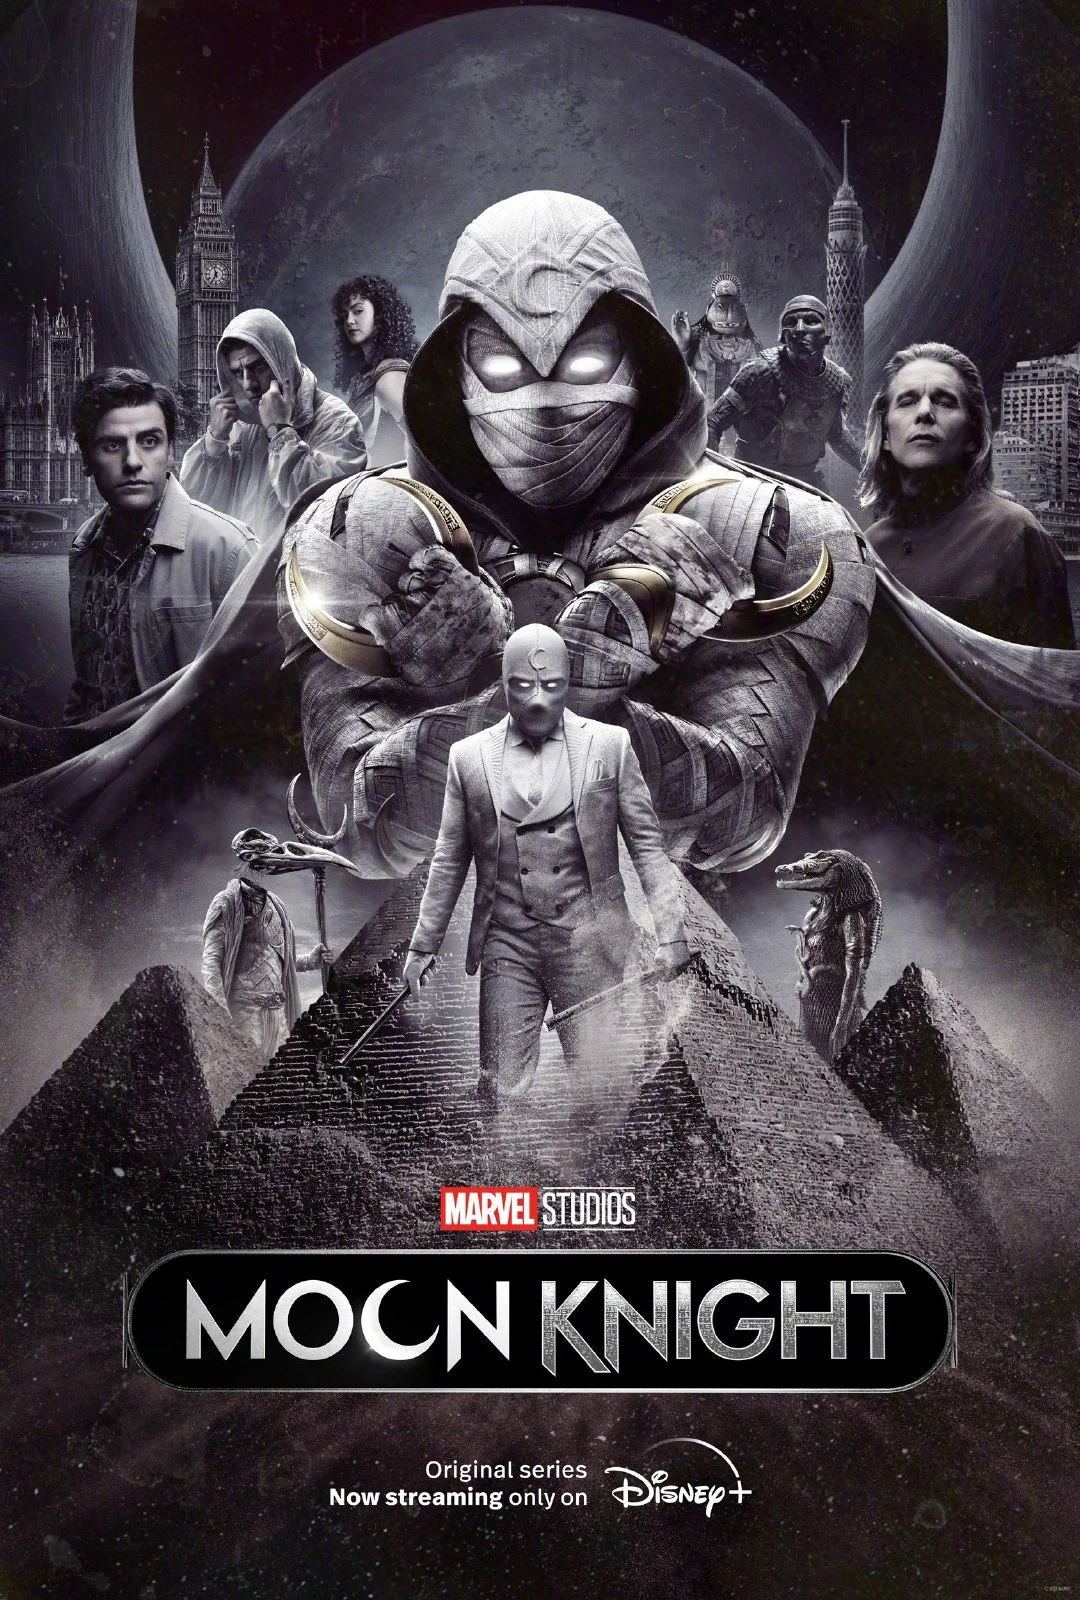 Marvel's new drama "Moon Knight" released the ultimate poster